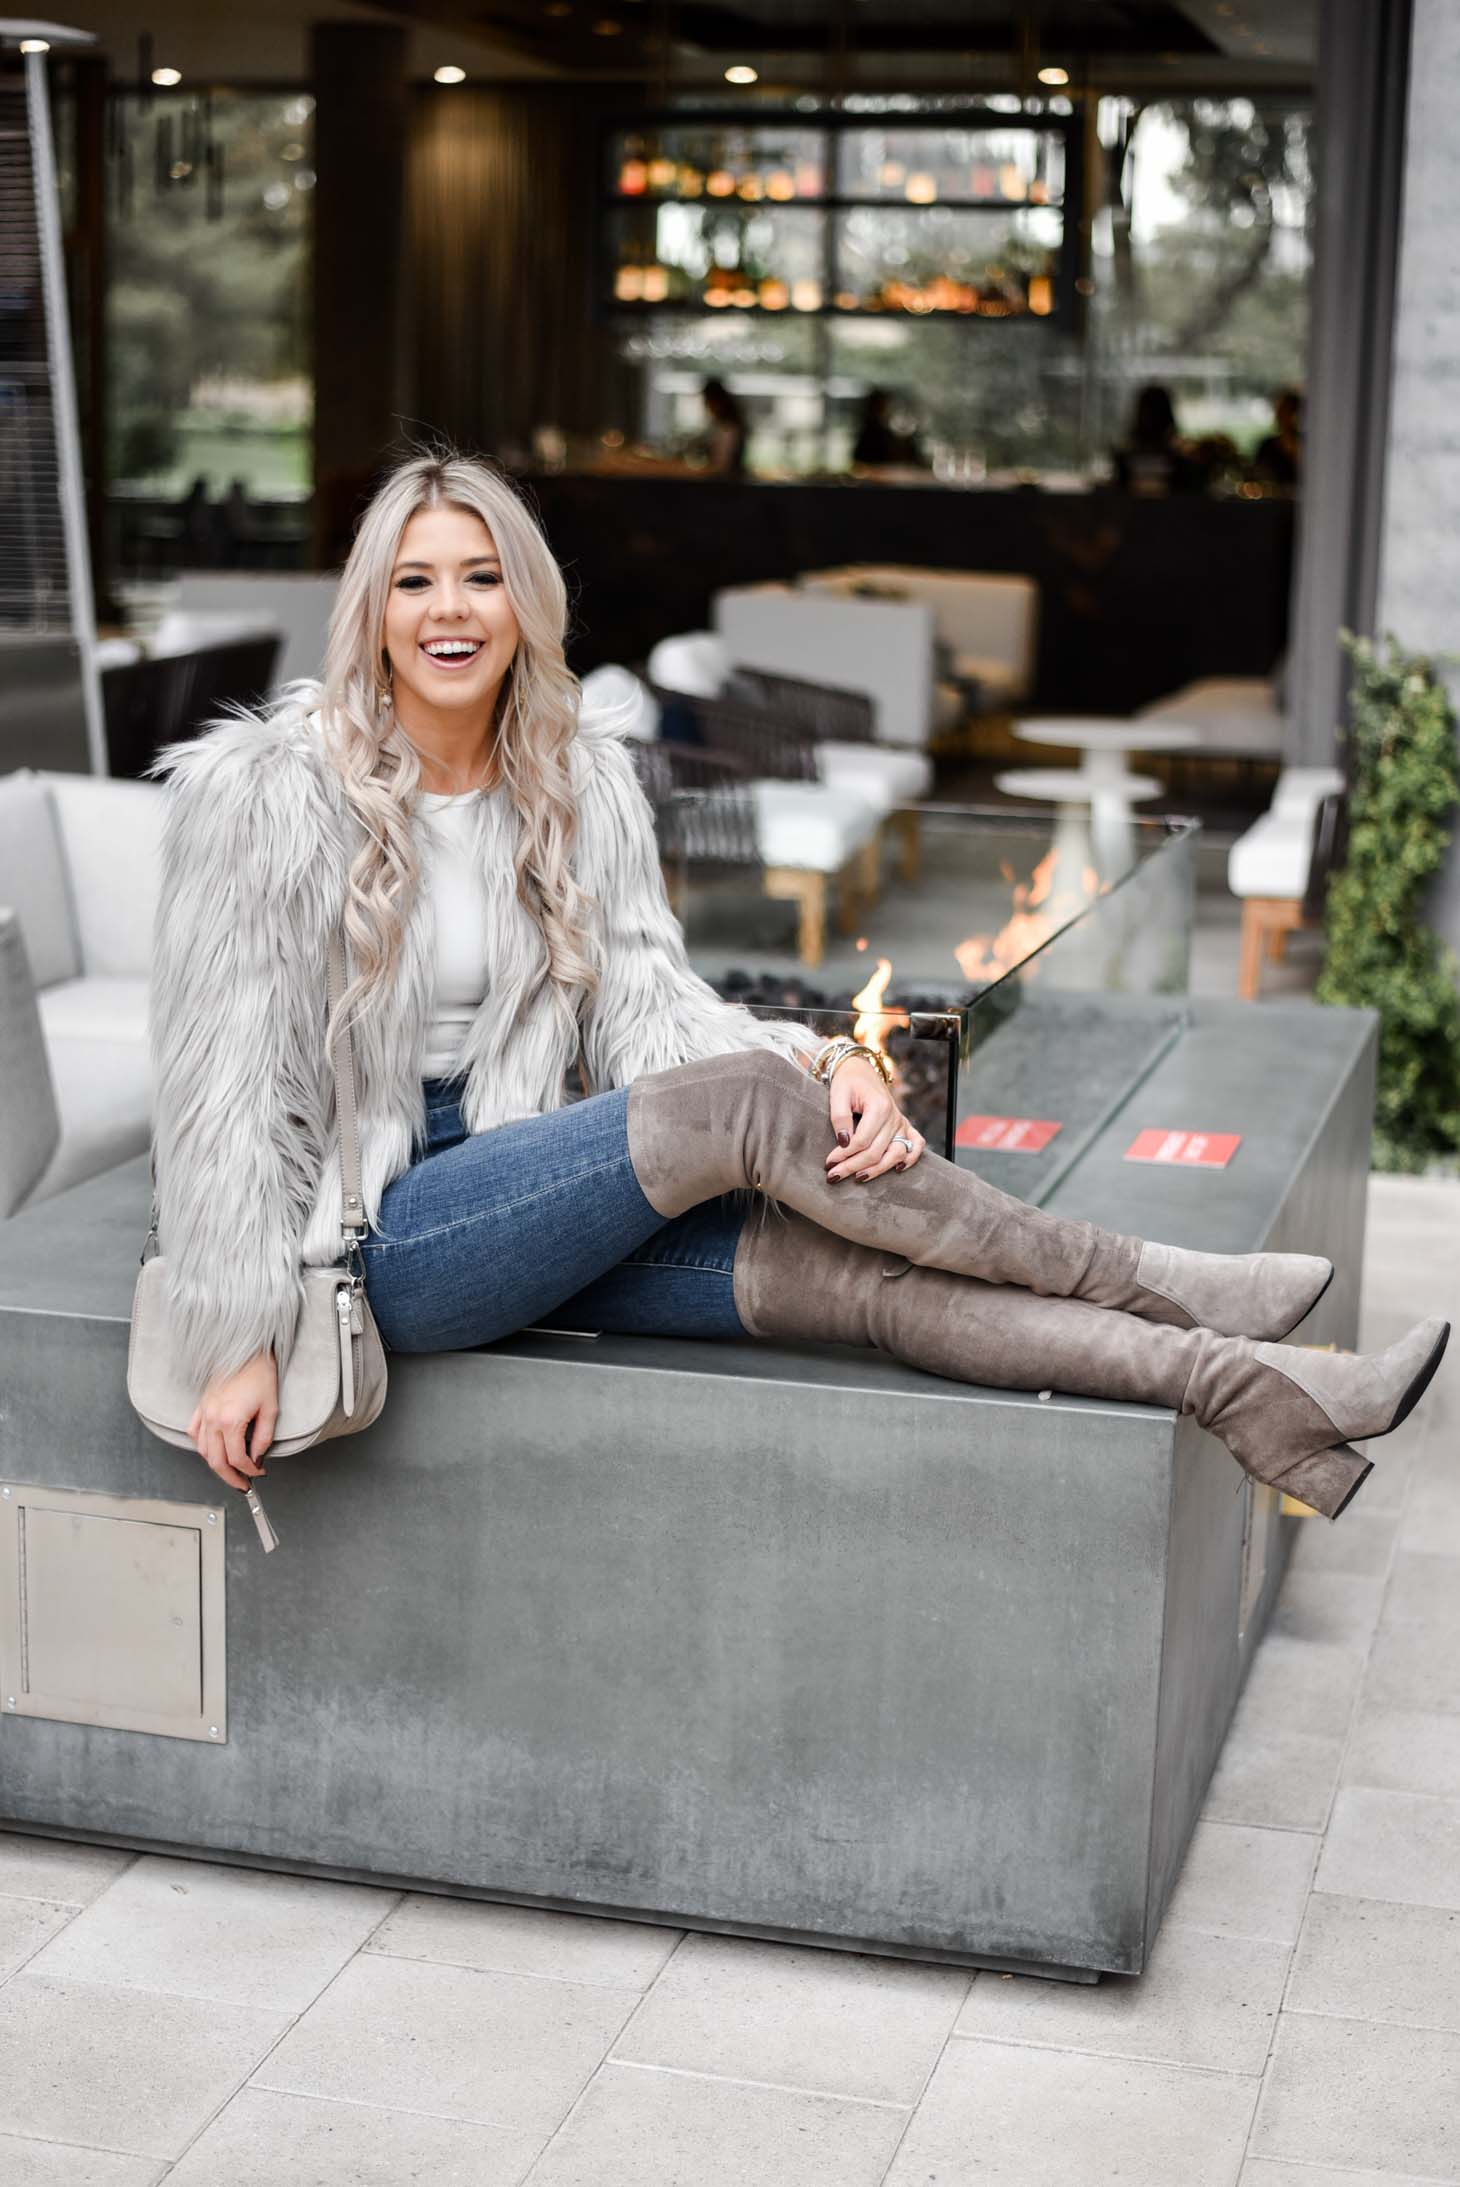 Erin Elizabeth of Wink and a Twirl shares the perfect faux fur jacket from Chicwish during her stay at AC Hotel Phoenix Biltmore in Phoenix, Arizona